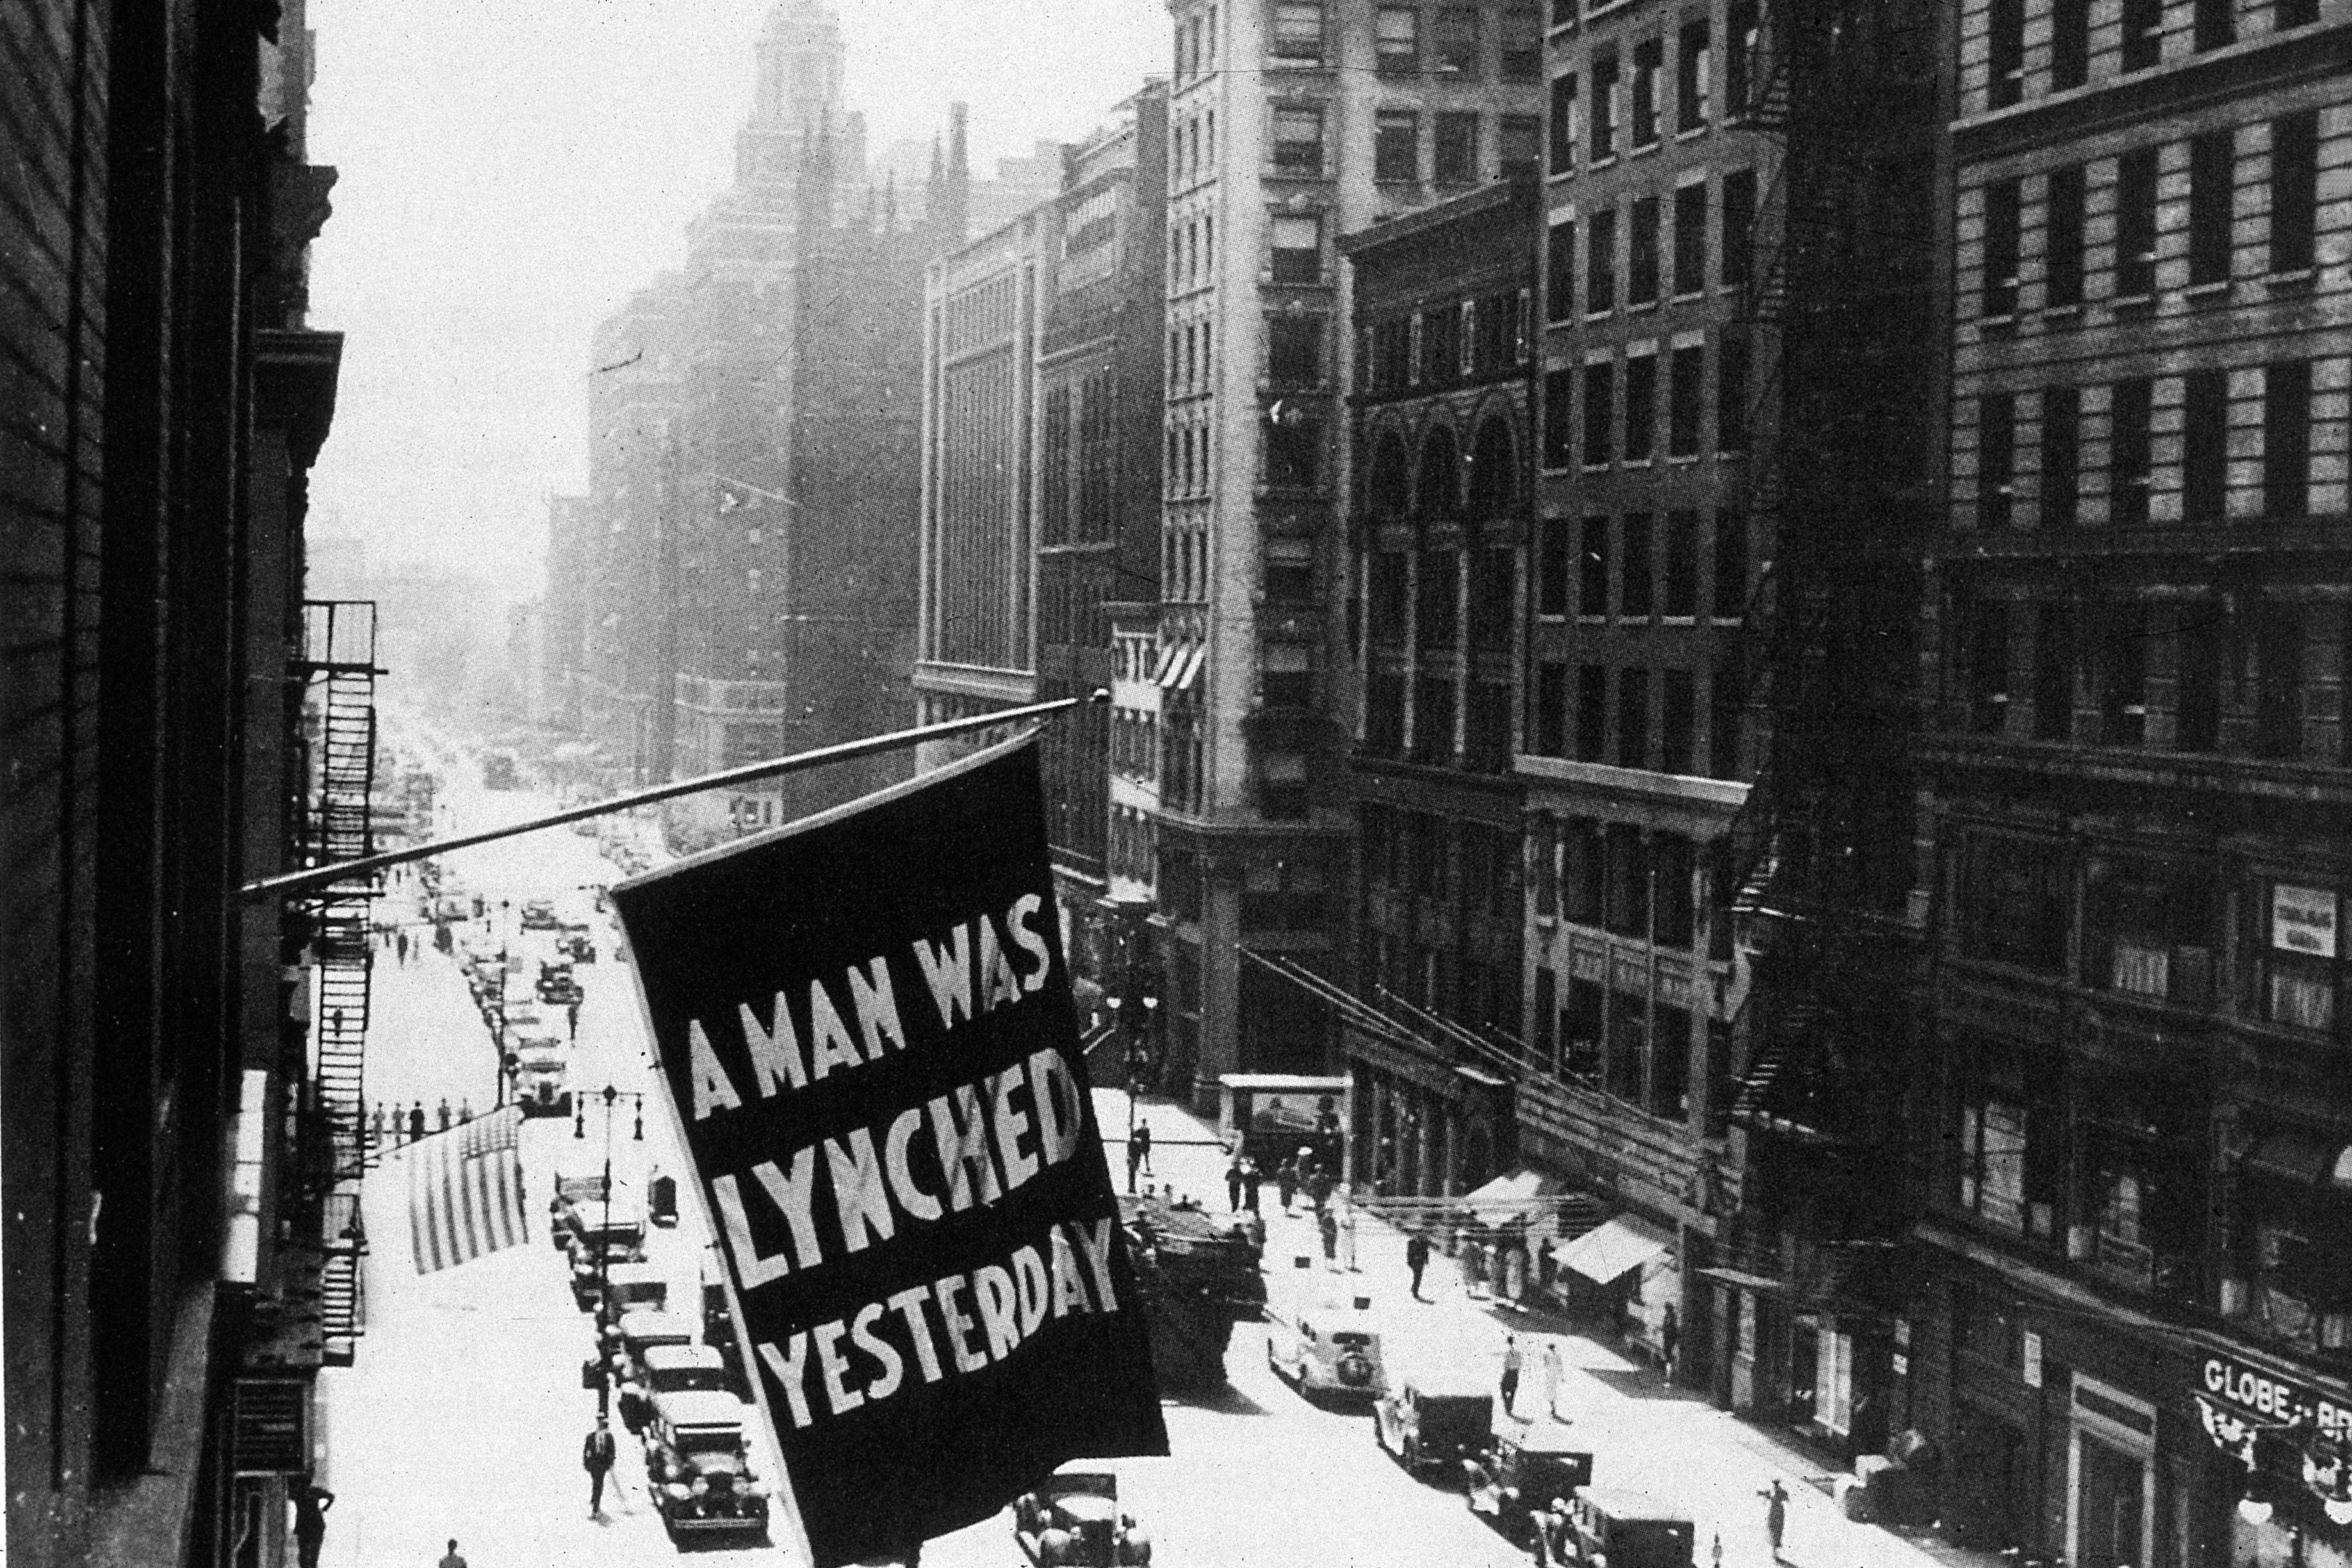 A flag hanging outside the headquarters of the NAACP, bearing the words "A Man Was Lynched Yesterday."